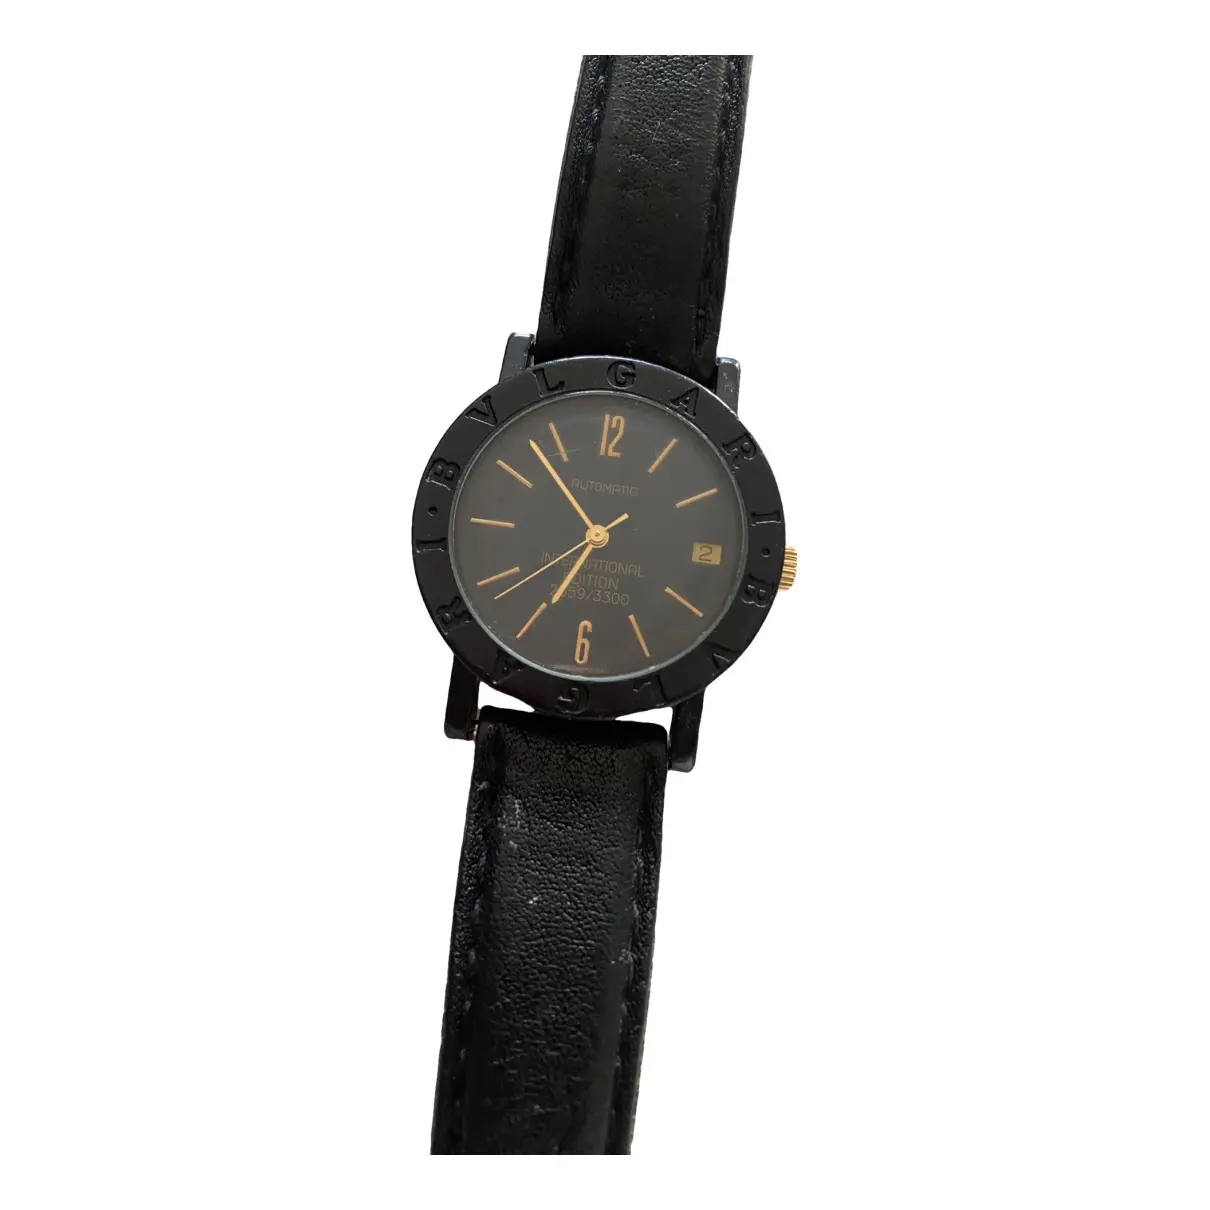 Carbon Gold watch